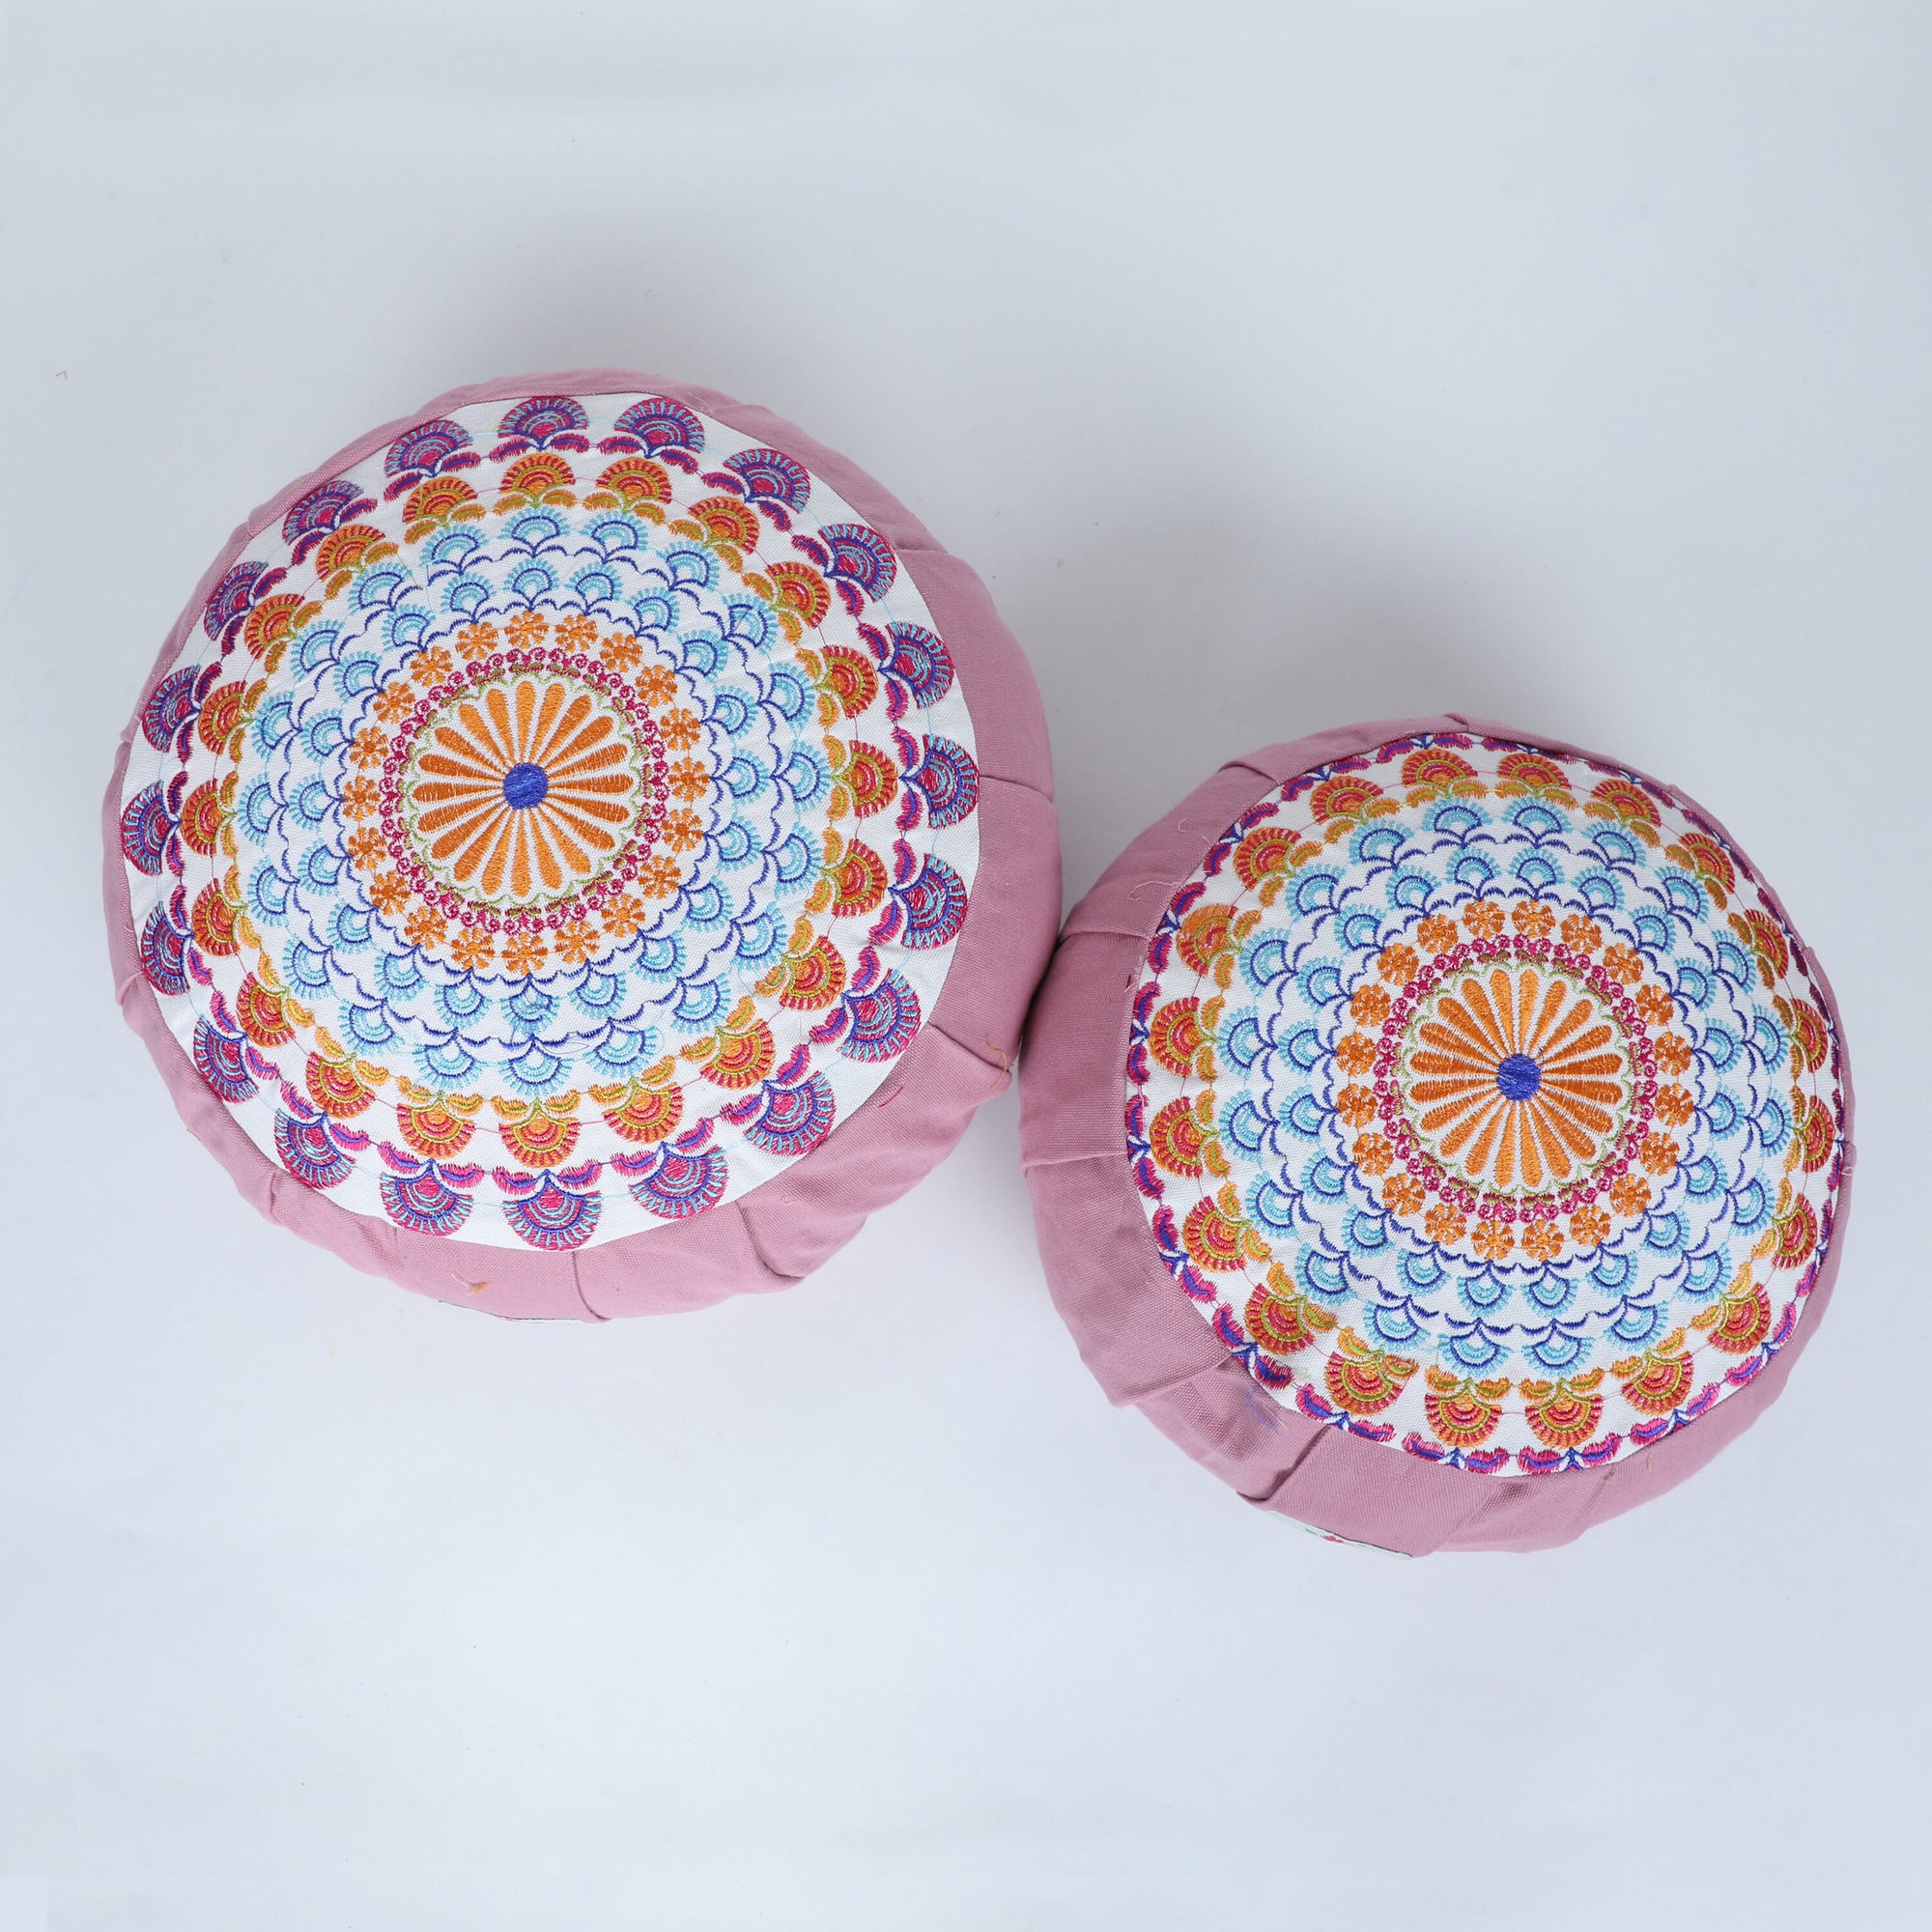 Embroidered Round Zafu Yoga Pillow |Zipped Cover |Washable| Portable - Godavari (Blue on Dust Pink) - Size and Filling Options